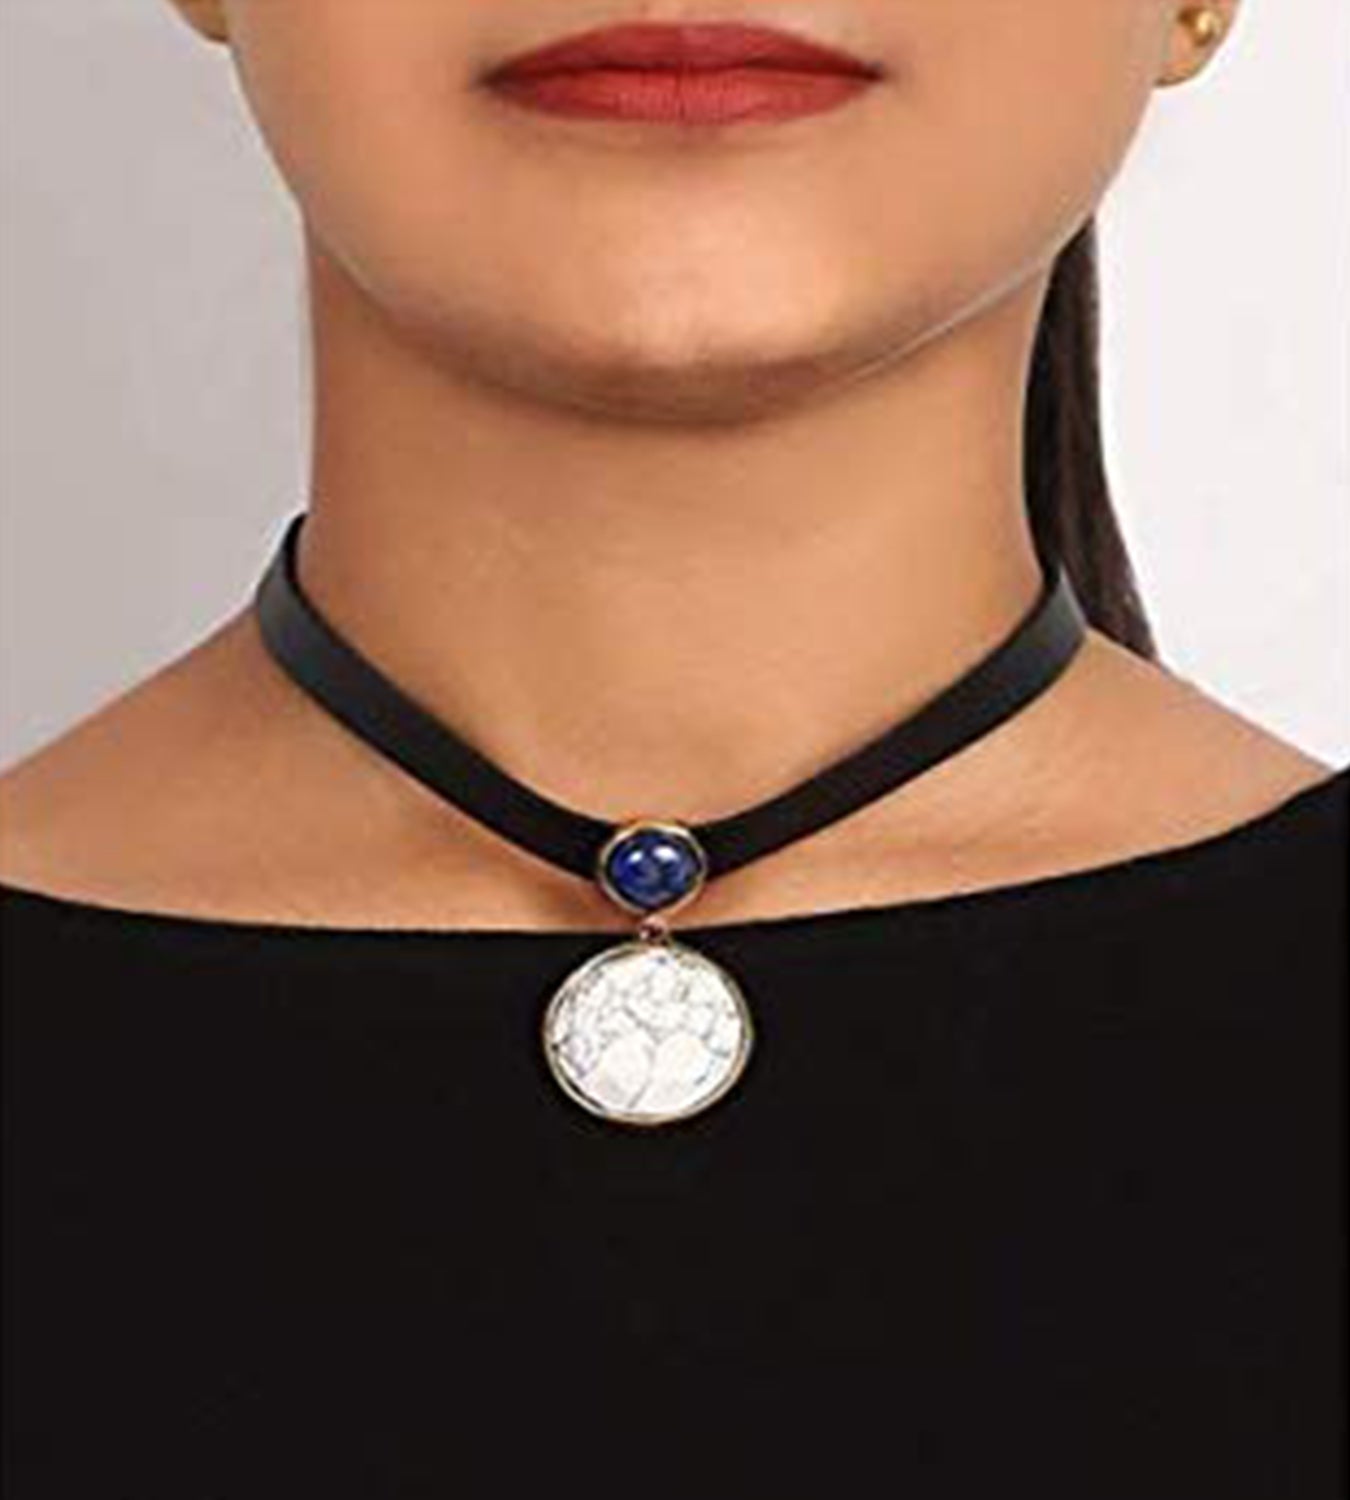 White Stone Choker Necklace Jewellery for Women - Coral Tree 